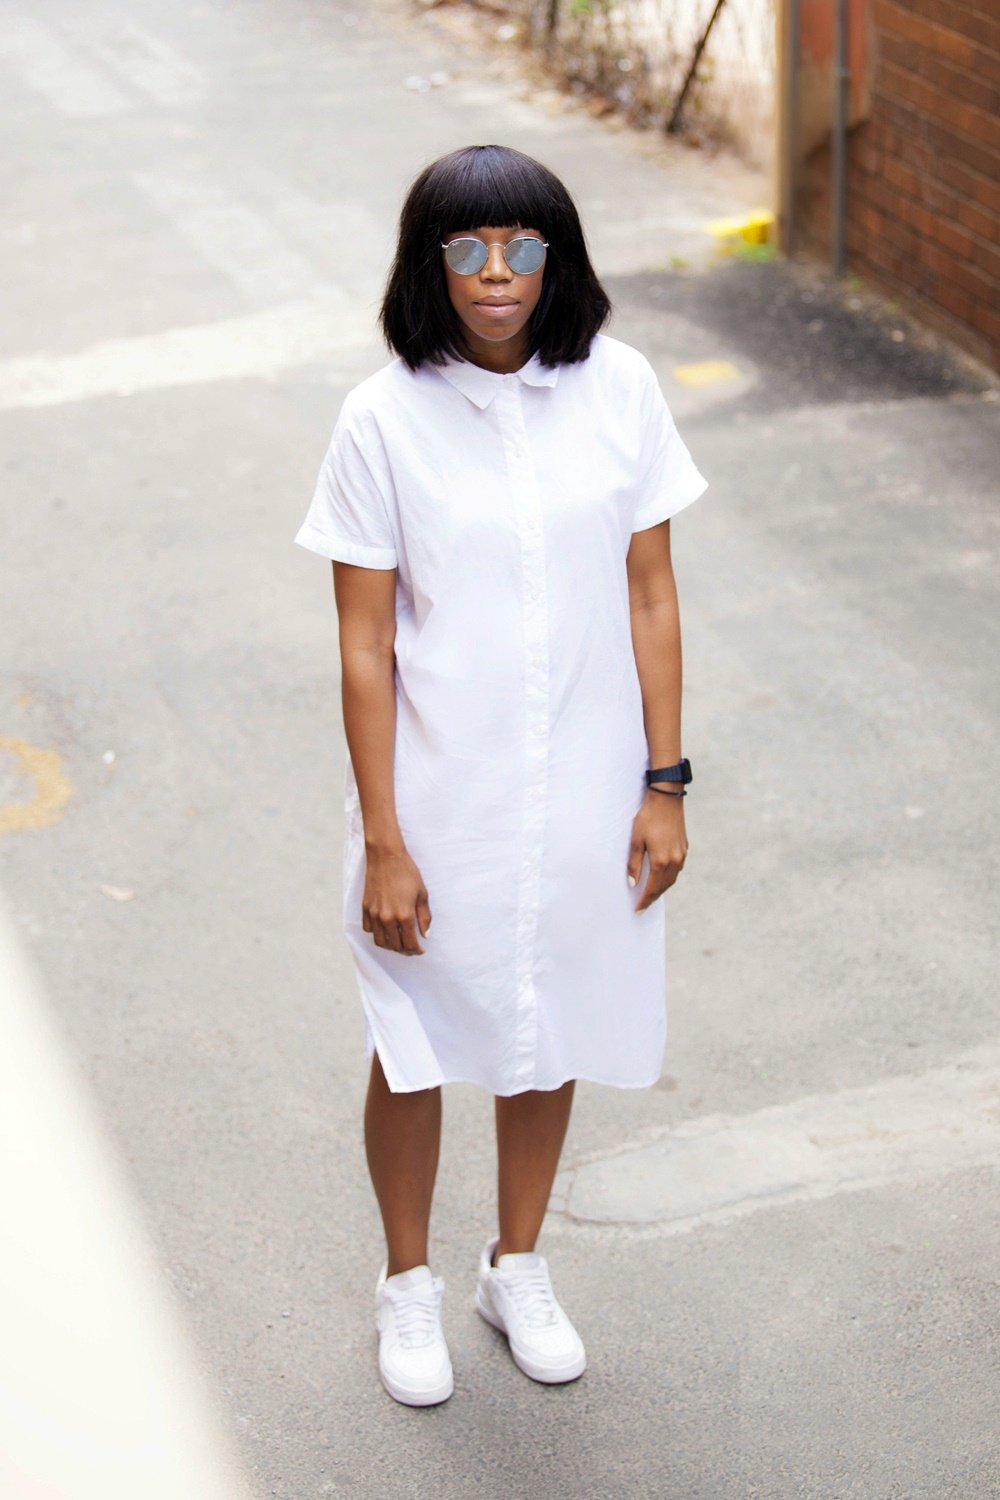 The white shirt dress is your new spring staple | Life